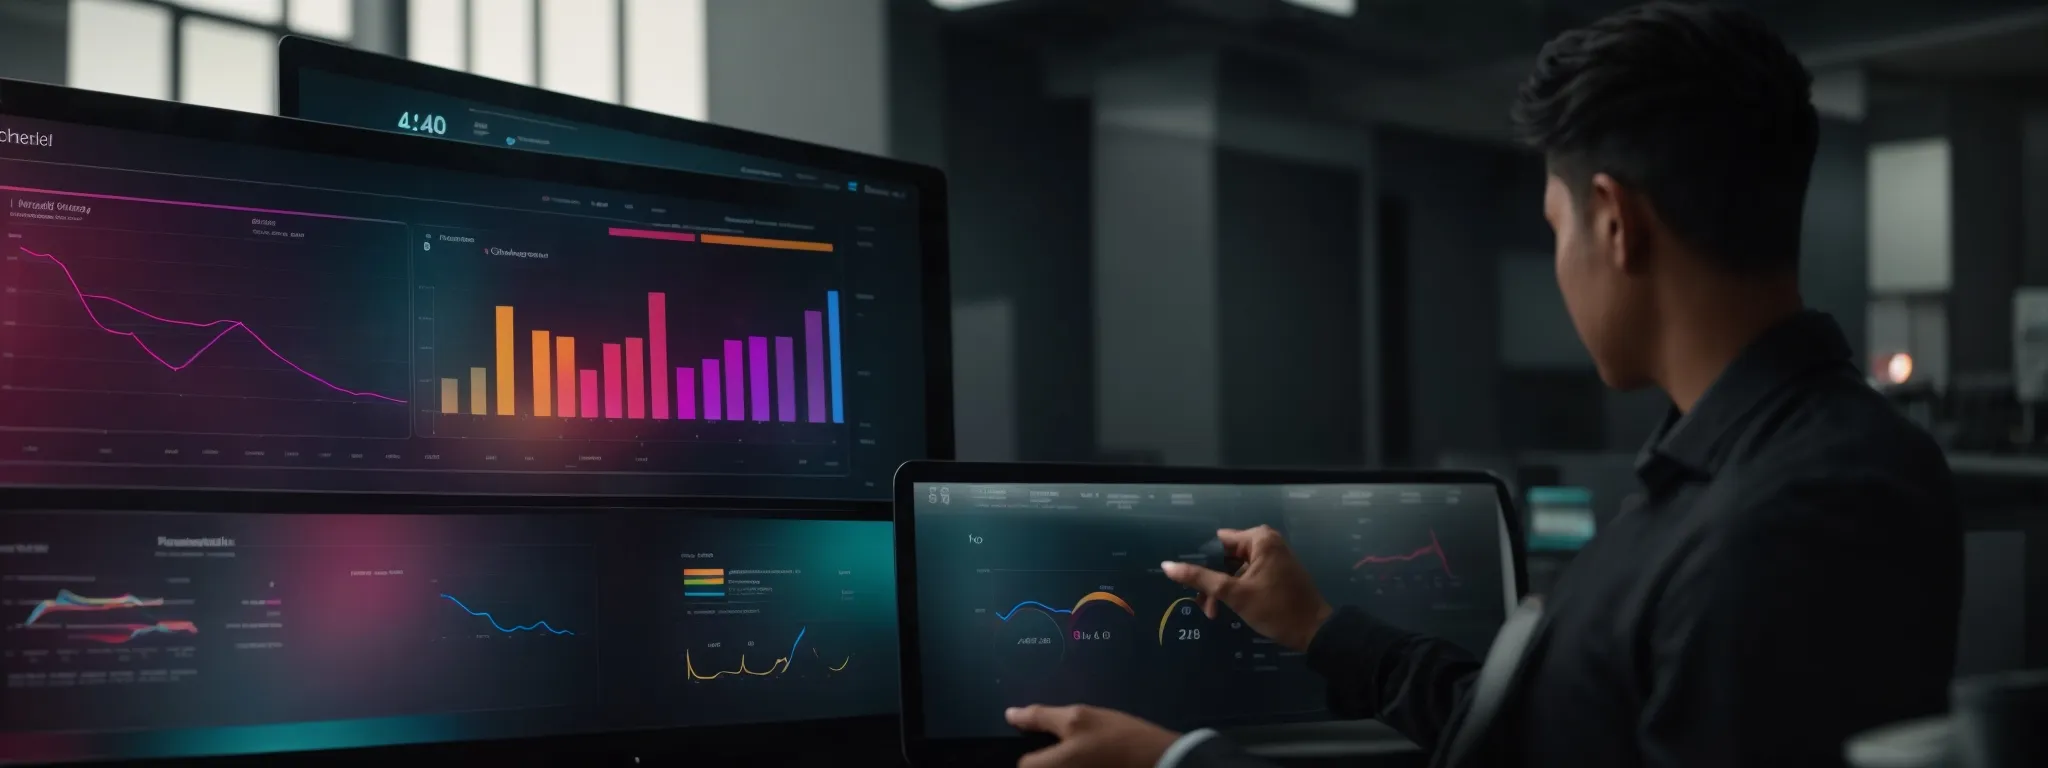 a person using a sleek, modern touchscreen interface to effortlessly navigate and analyze a colorful data dashboard.